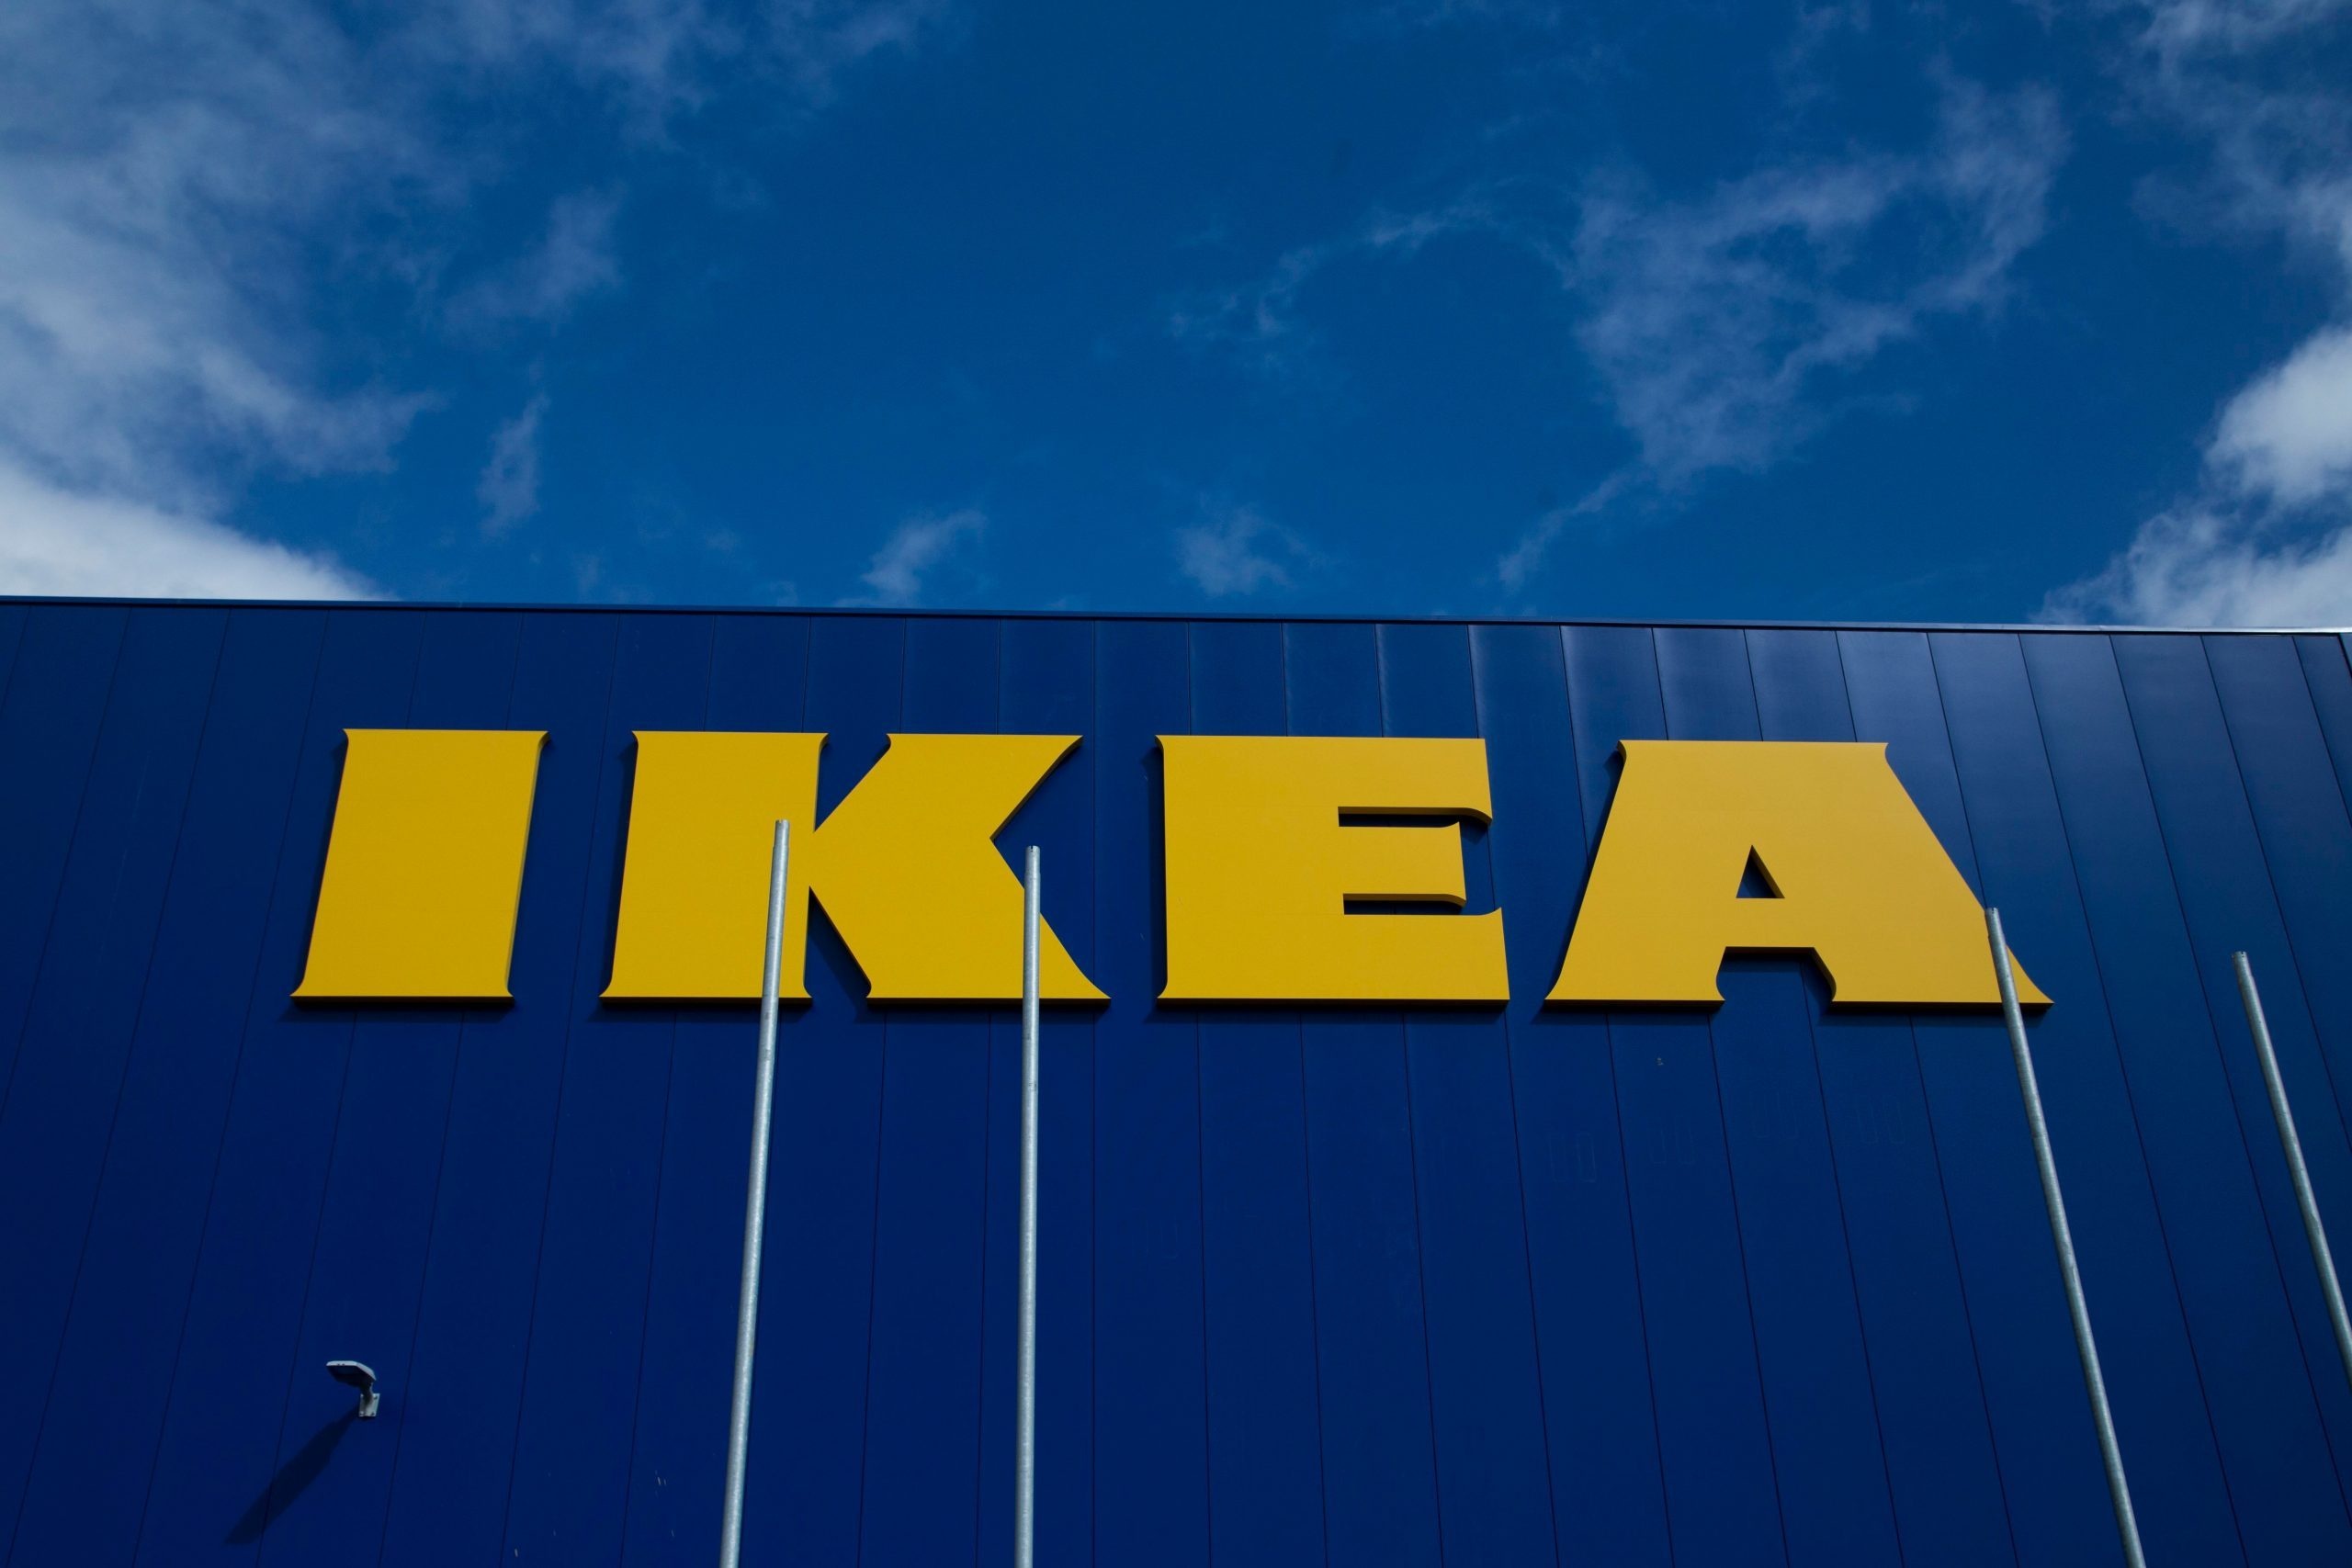 Ikea: The brand used by the group is derived from an acronym, Ingvar Kamprad. 2560x1710 HD Wallpaper.